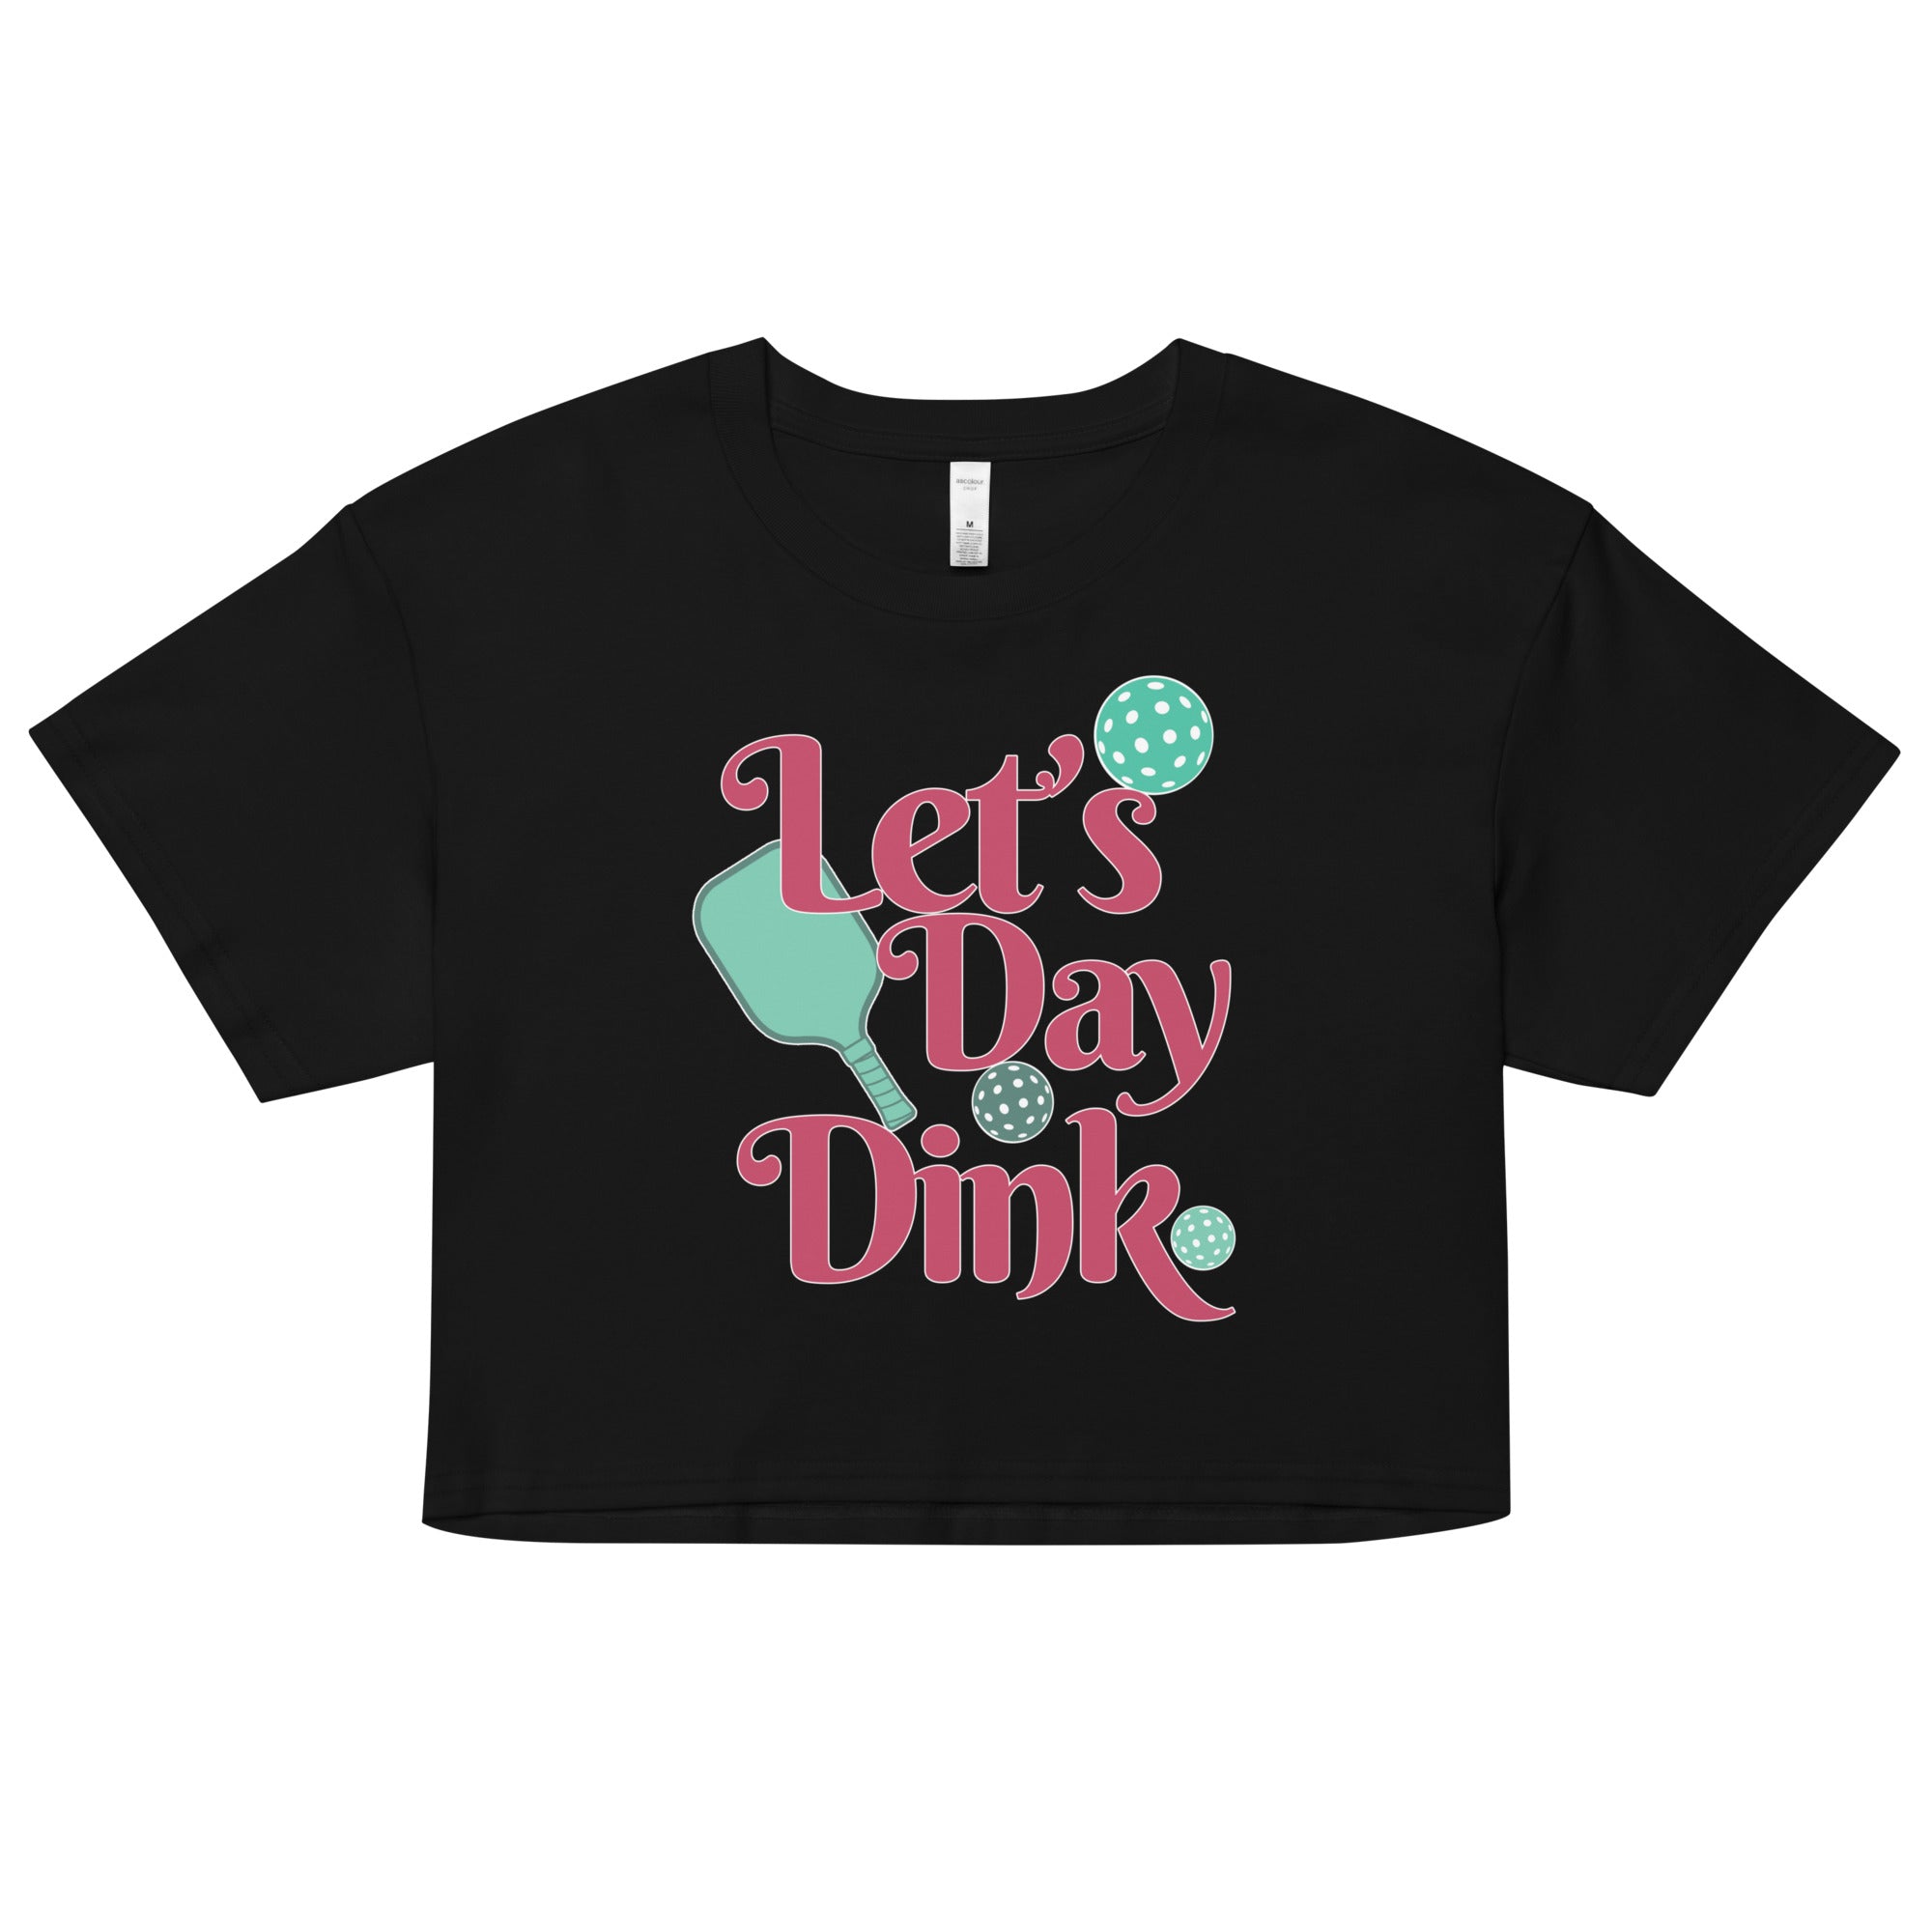 black let's day dink women's crop top pickleball apparel performance shirt athletic top front view